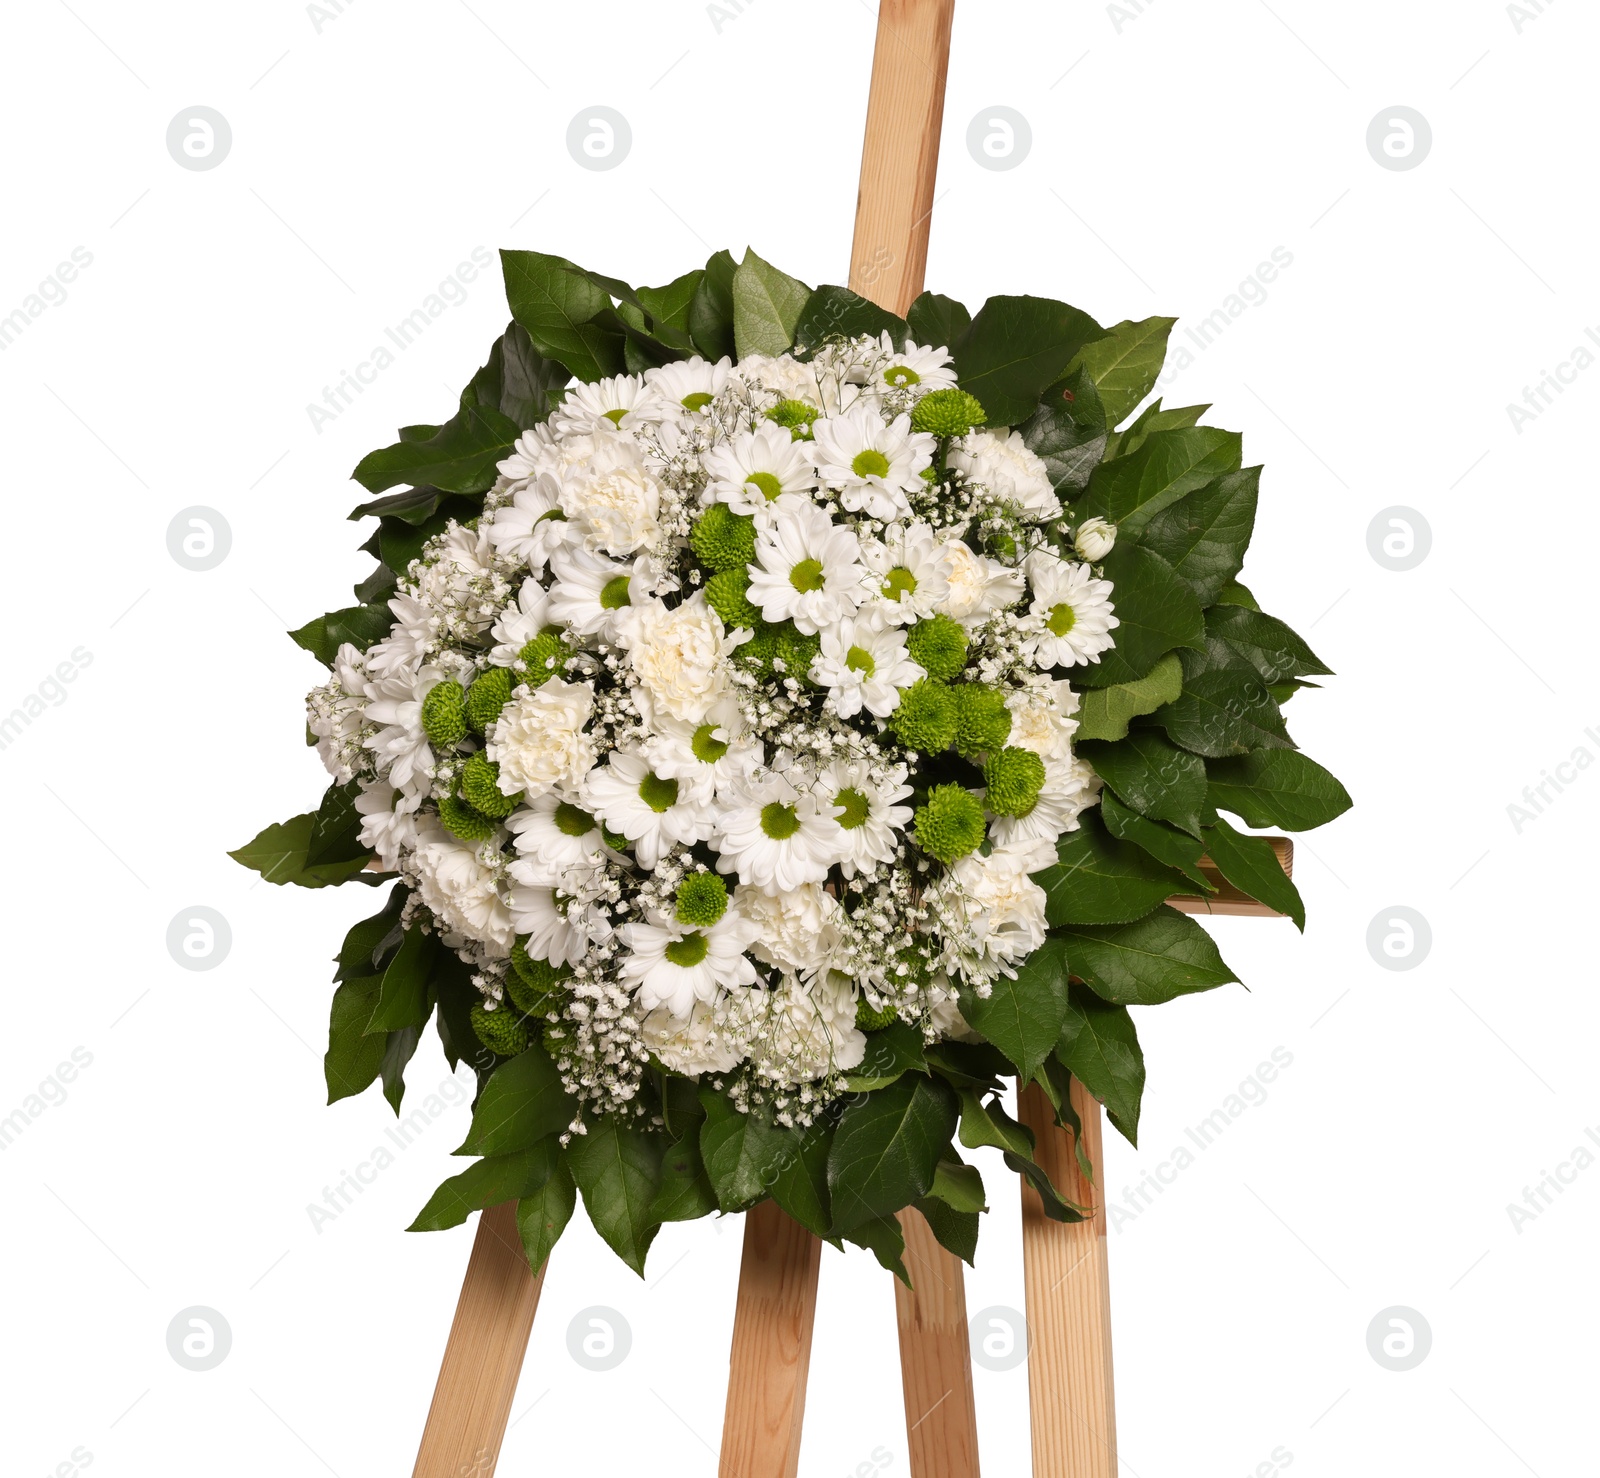 Photo of Funeral wreath of flowers on wooden stand against white background